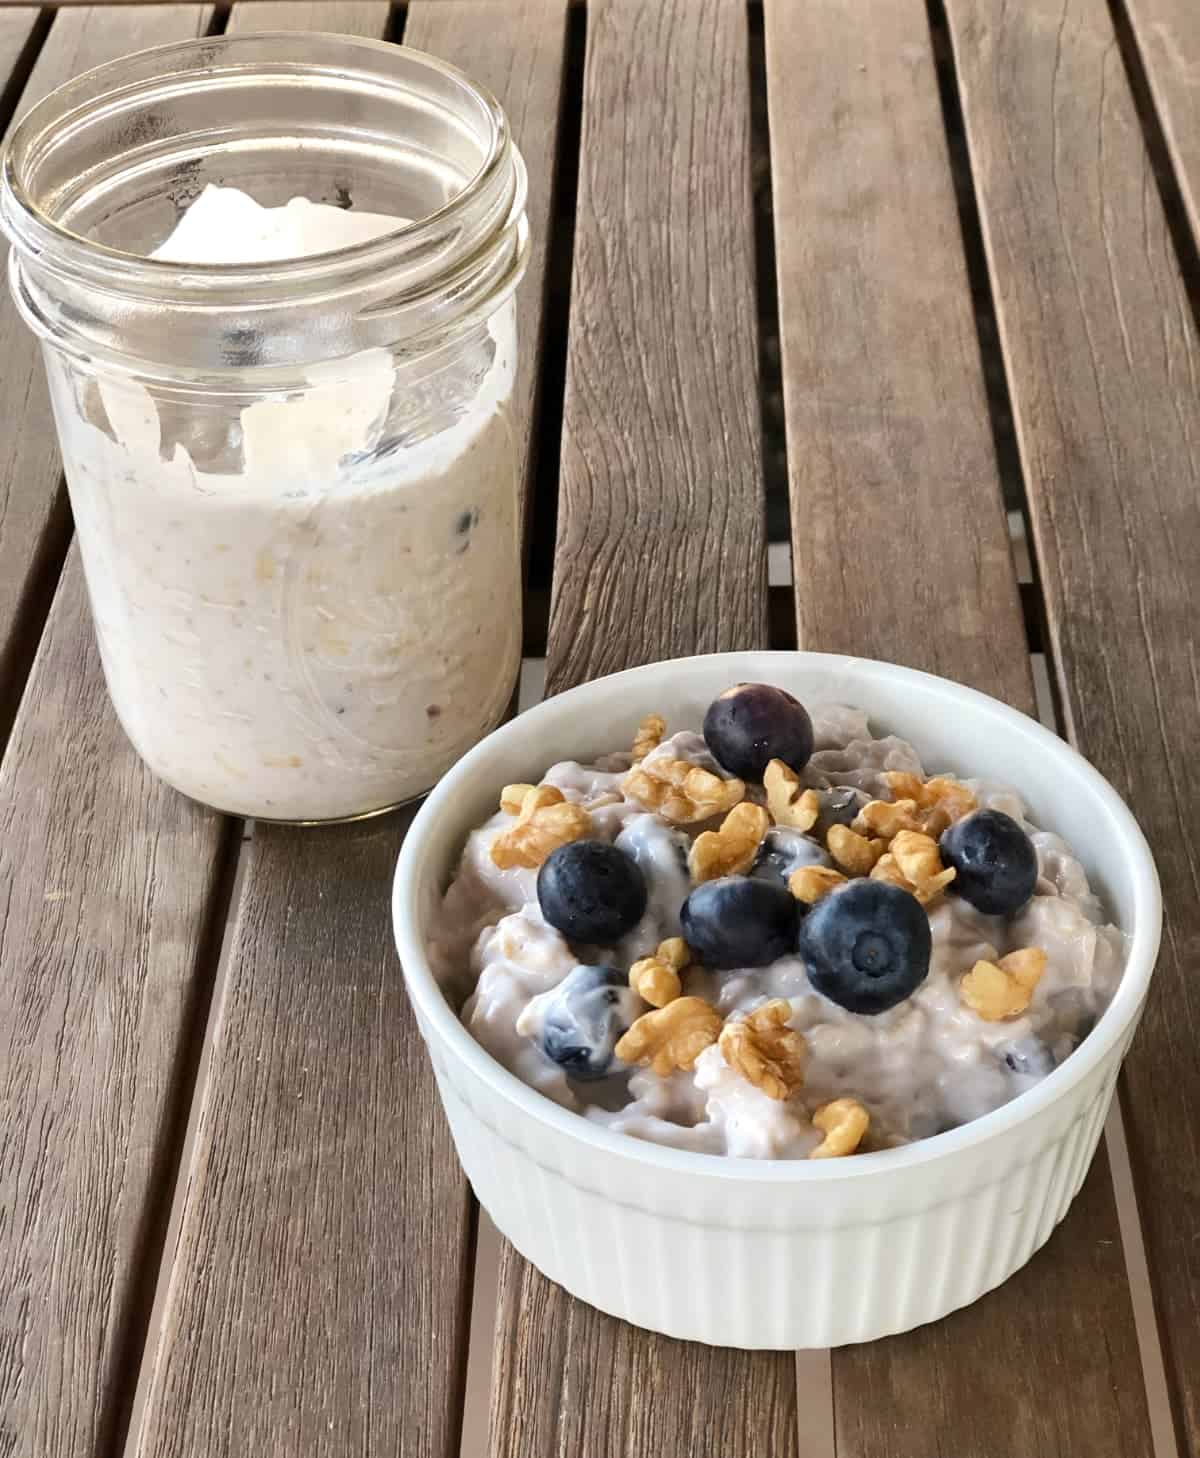 Two serving blueberry maple overnight oats, one in glass mason jar, the other topped with walnuts and fresh blueberries in small white ramekin.